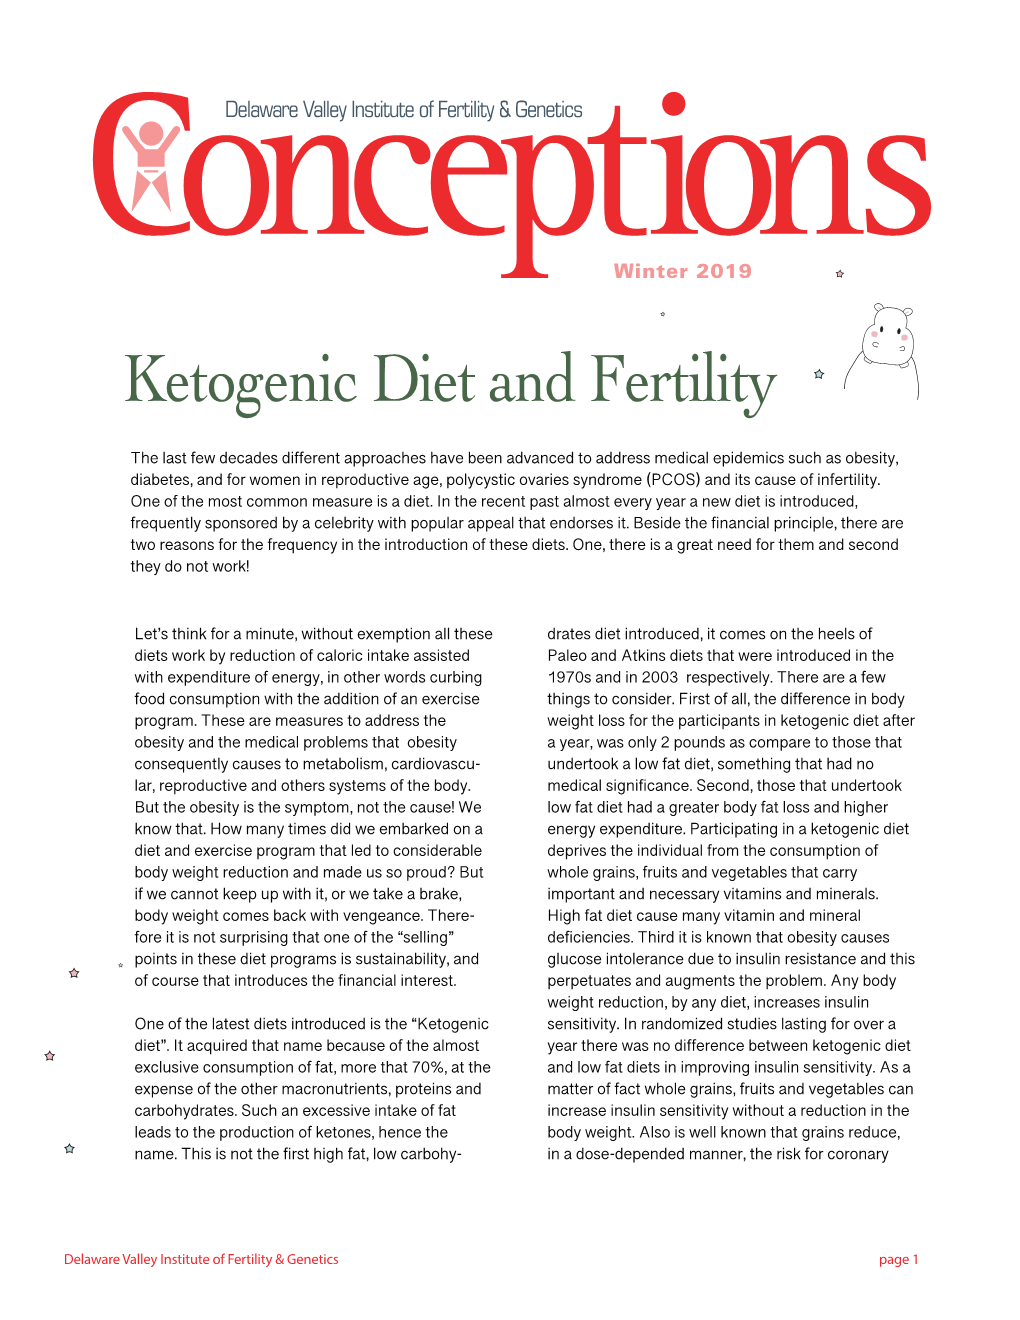 Ketogenic Diet and Fertility